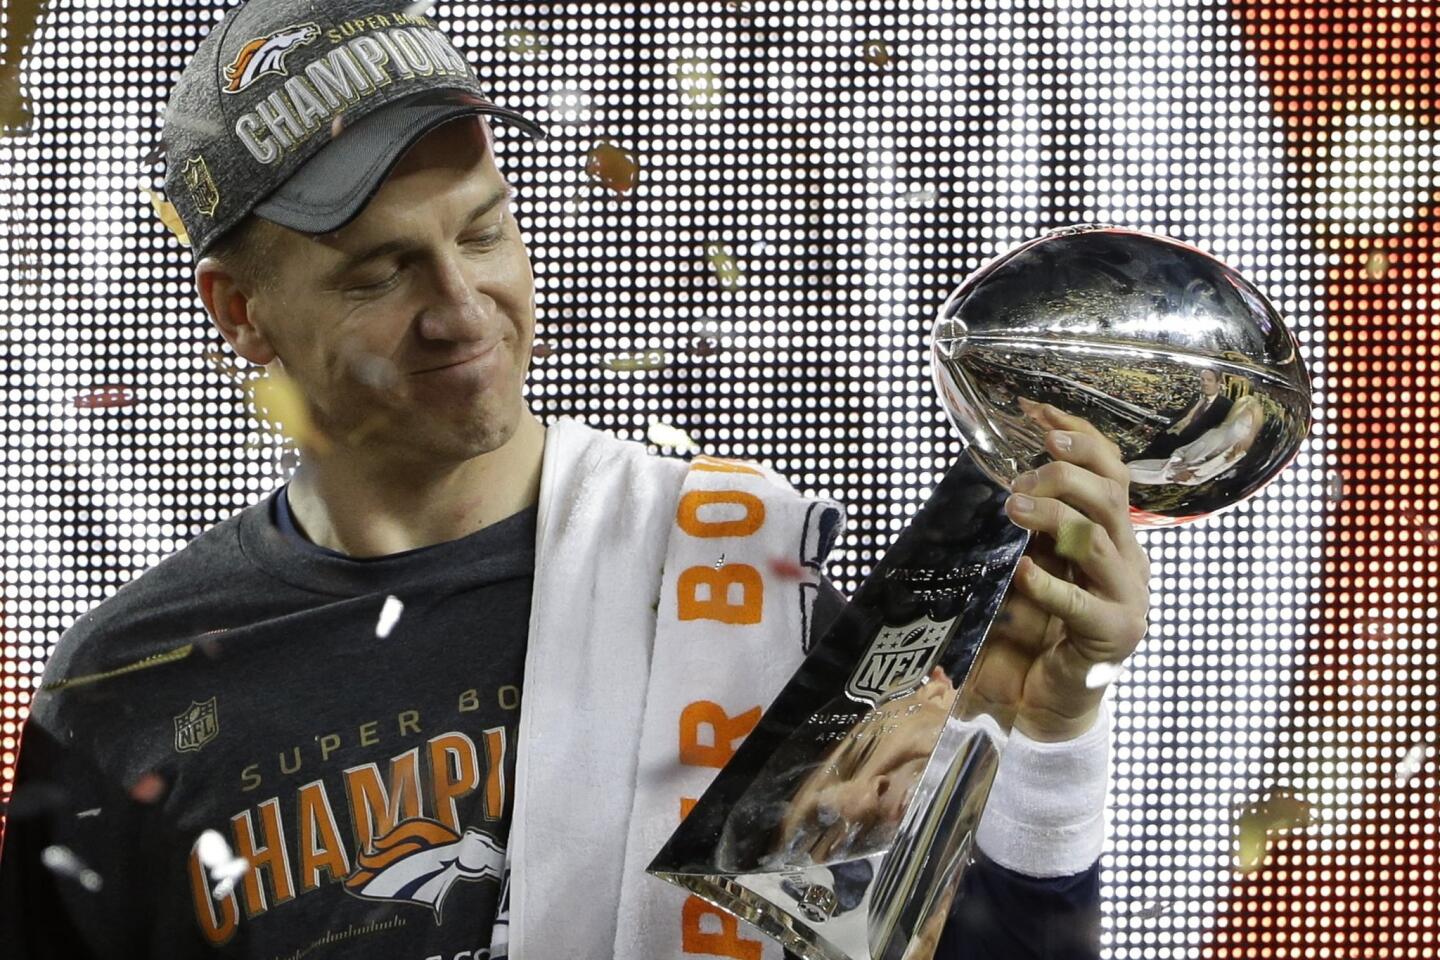 Peyton Manning caps his career with second Super Bowl title, and his mom  says it's time to retire - Los Angeles Times